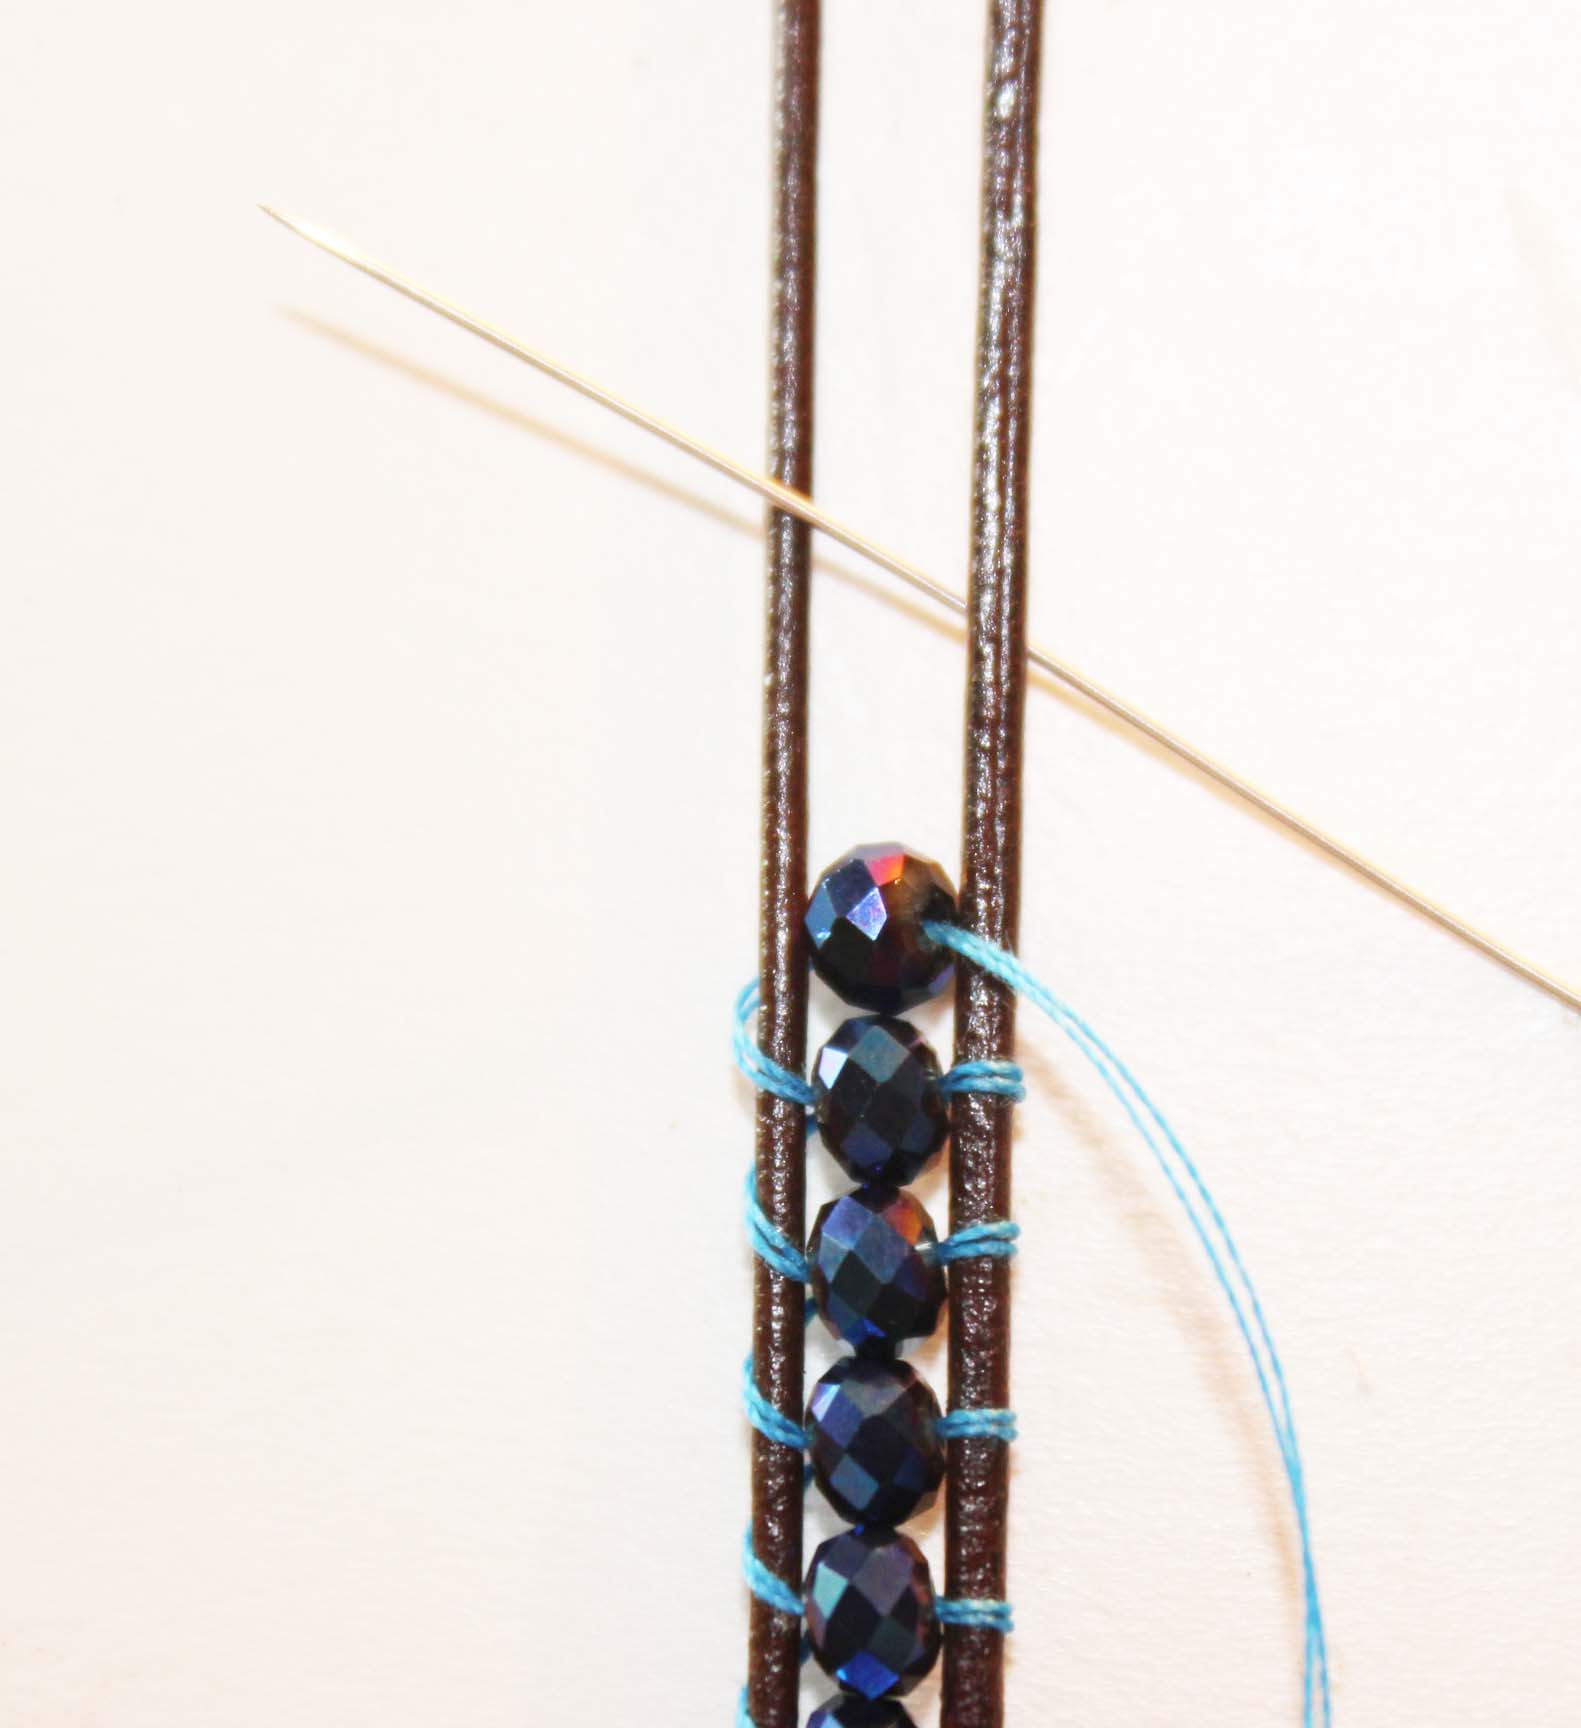 Add the bead pull thread over top of cord loop around the cord and up through center